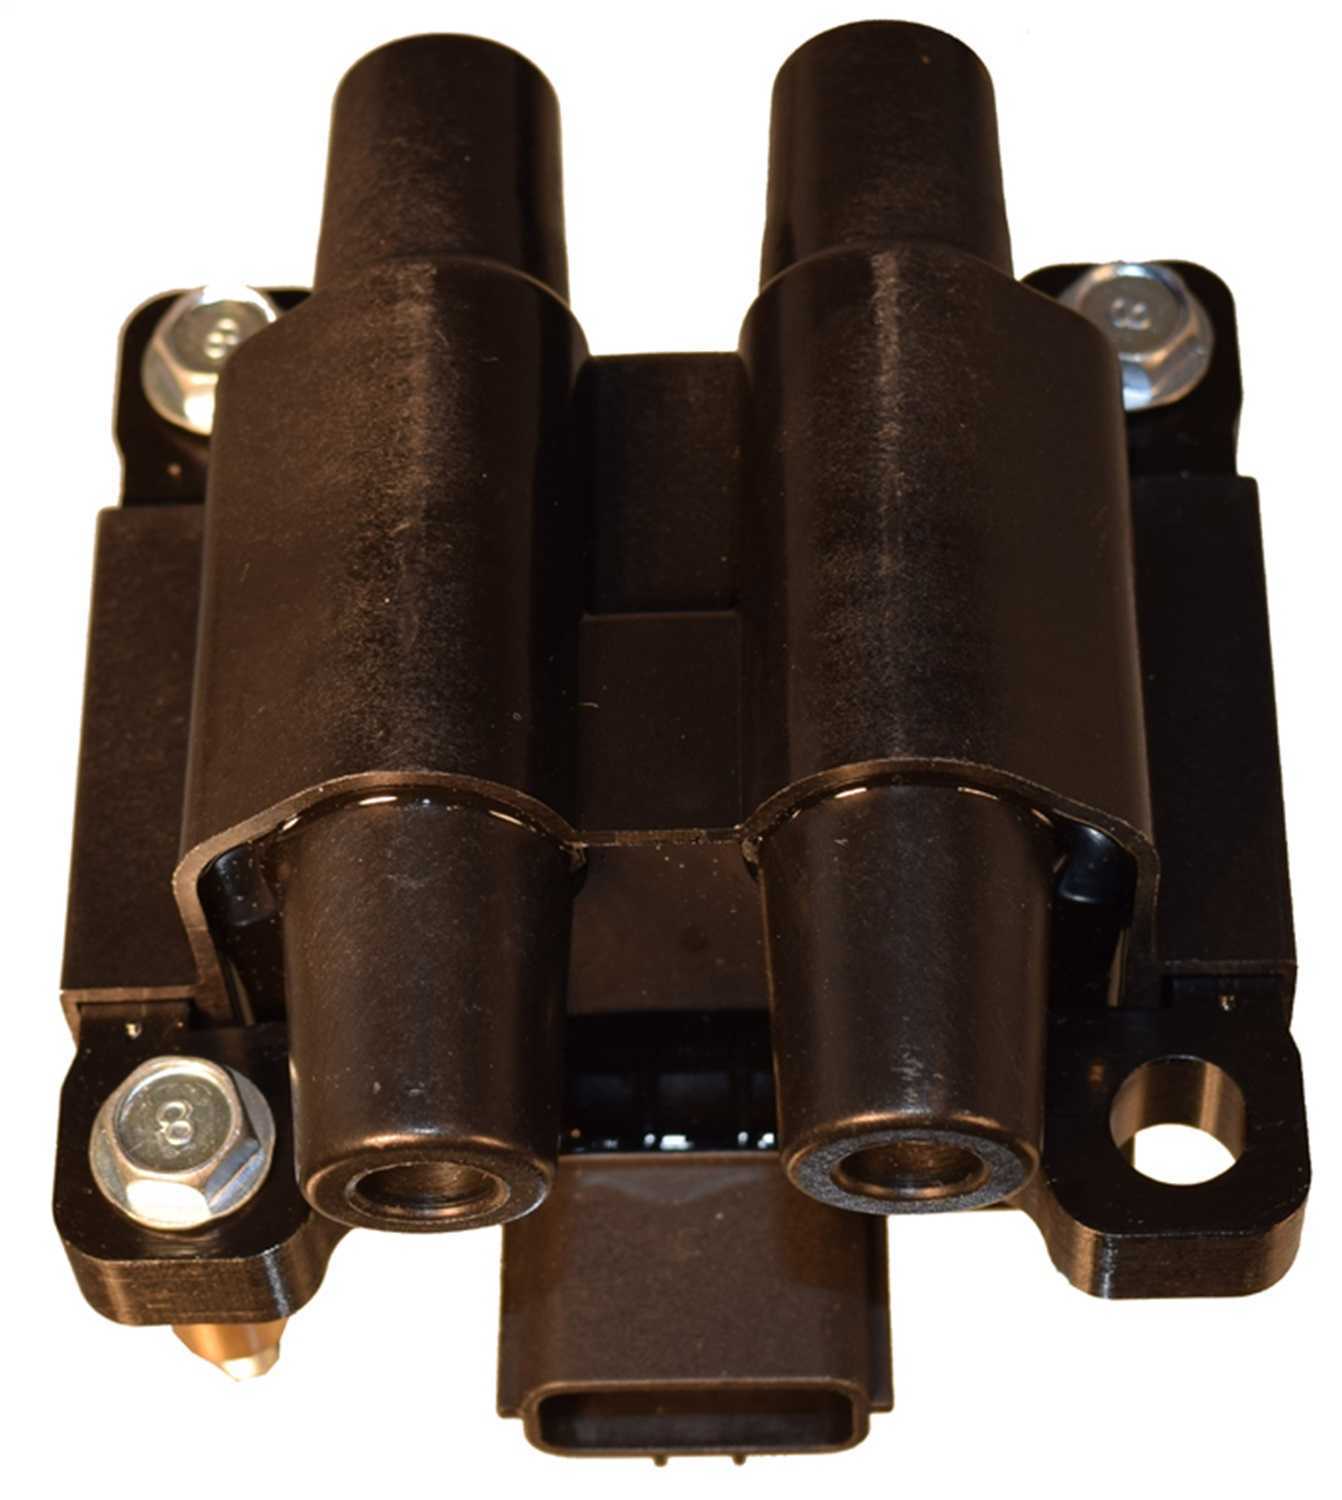 KARLYN/STI - Karlyn-STI Ignition Coil Pack - KLY 5126